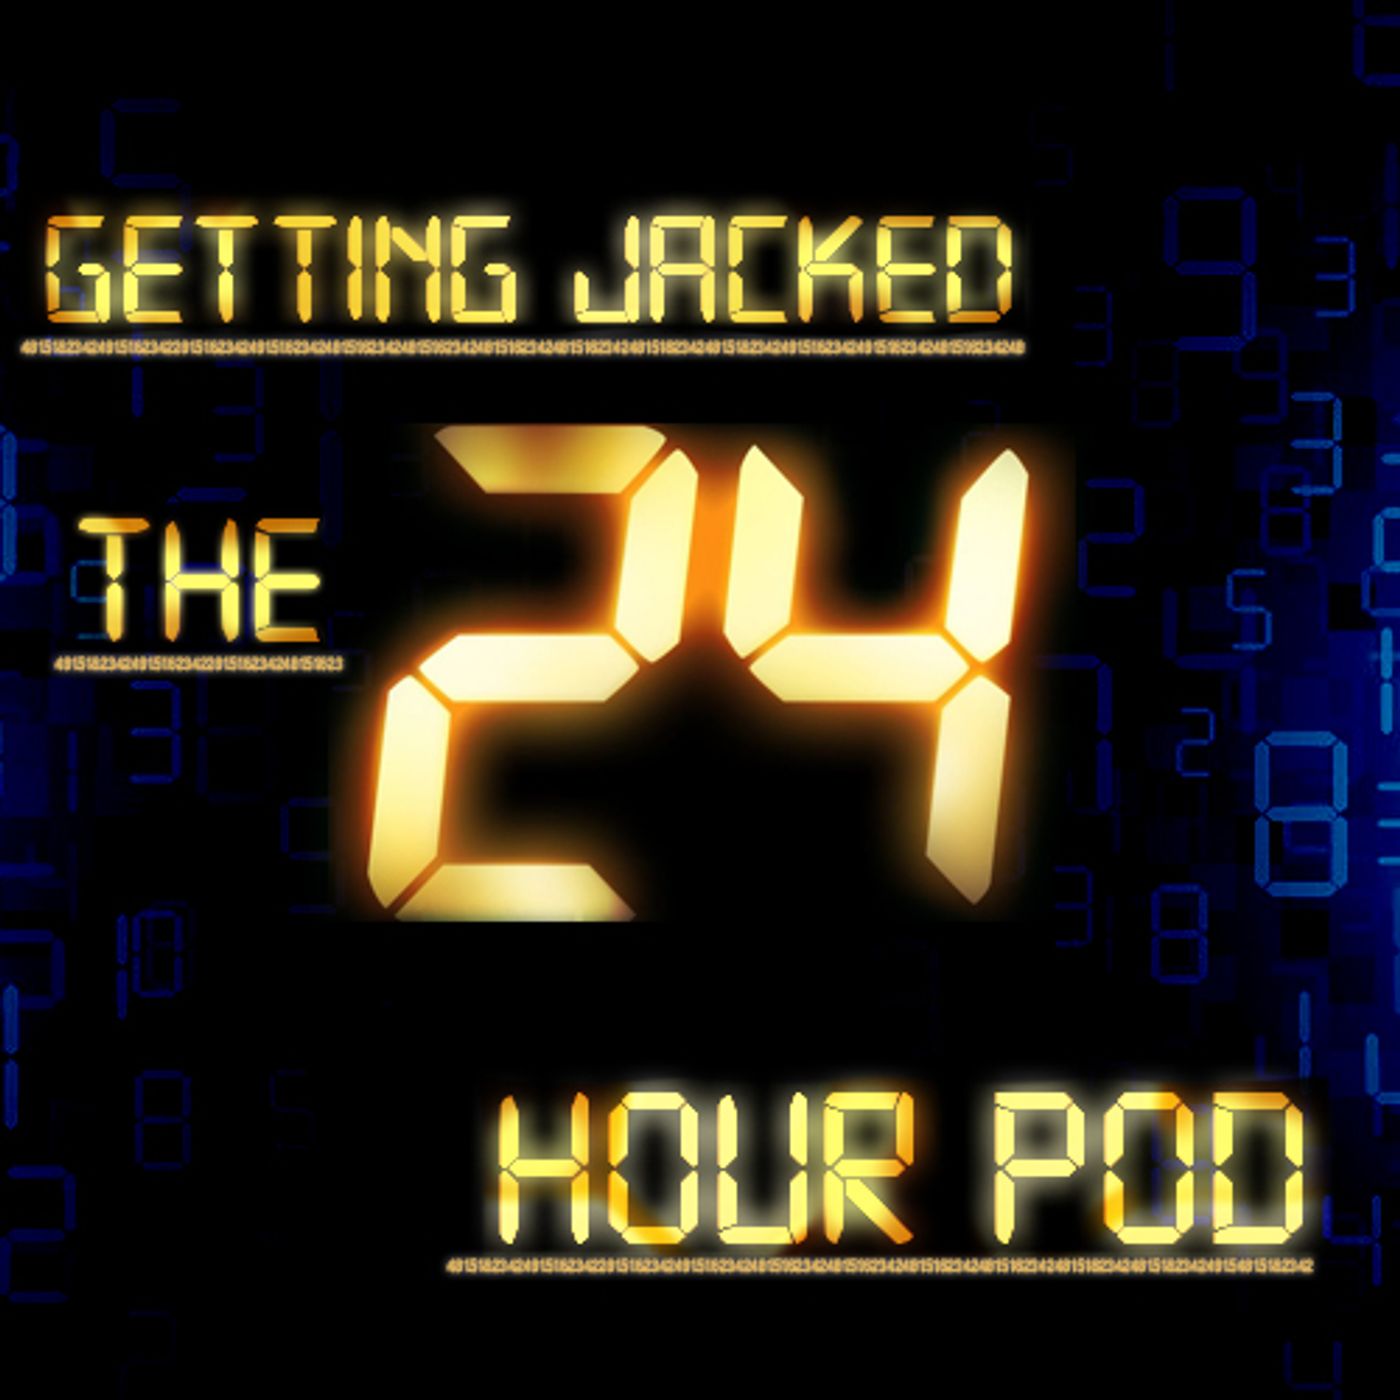 Getting Jacked: The 24 Hour Pod